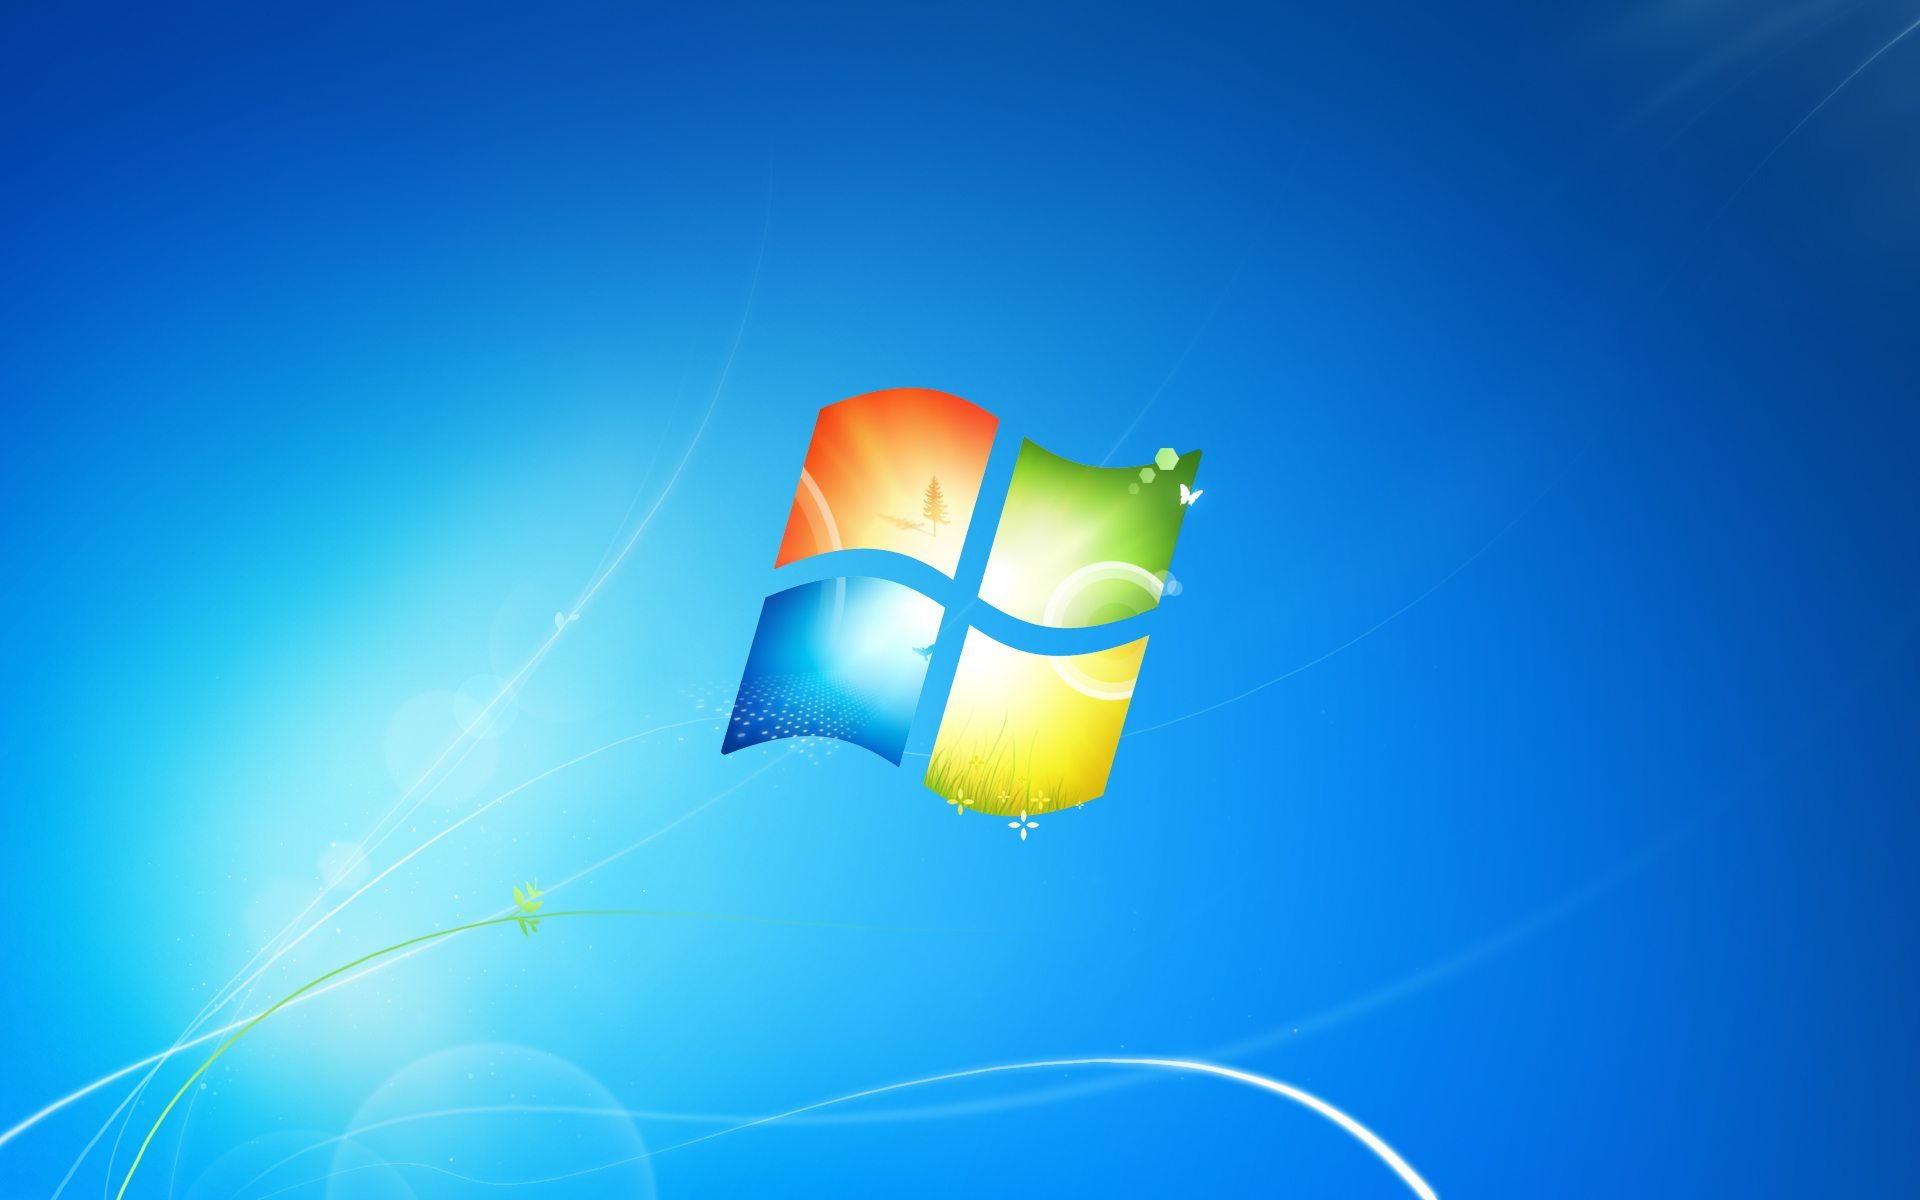 Official windows wallpapers